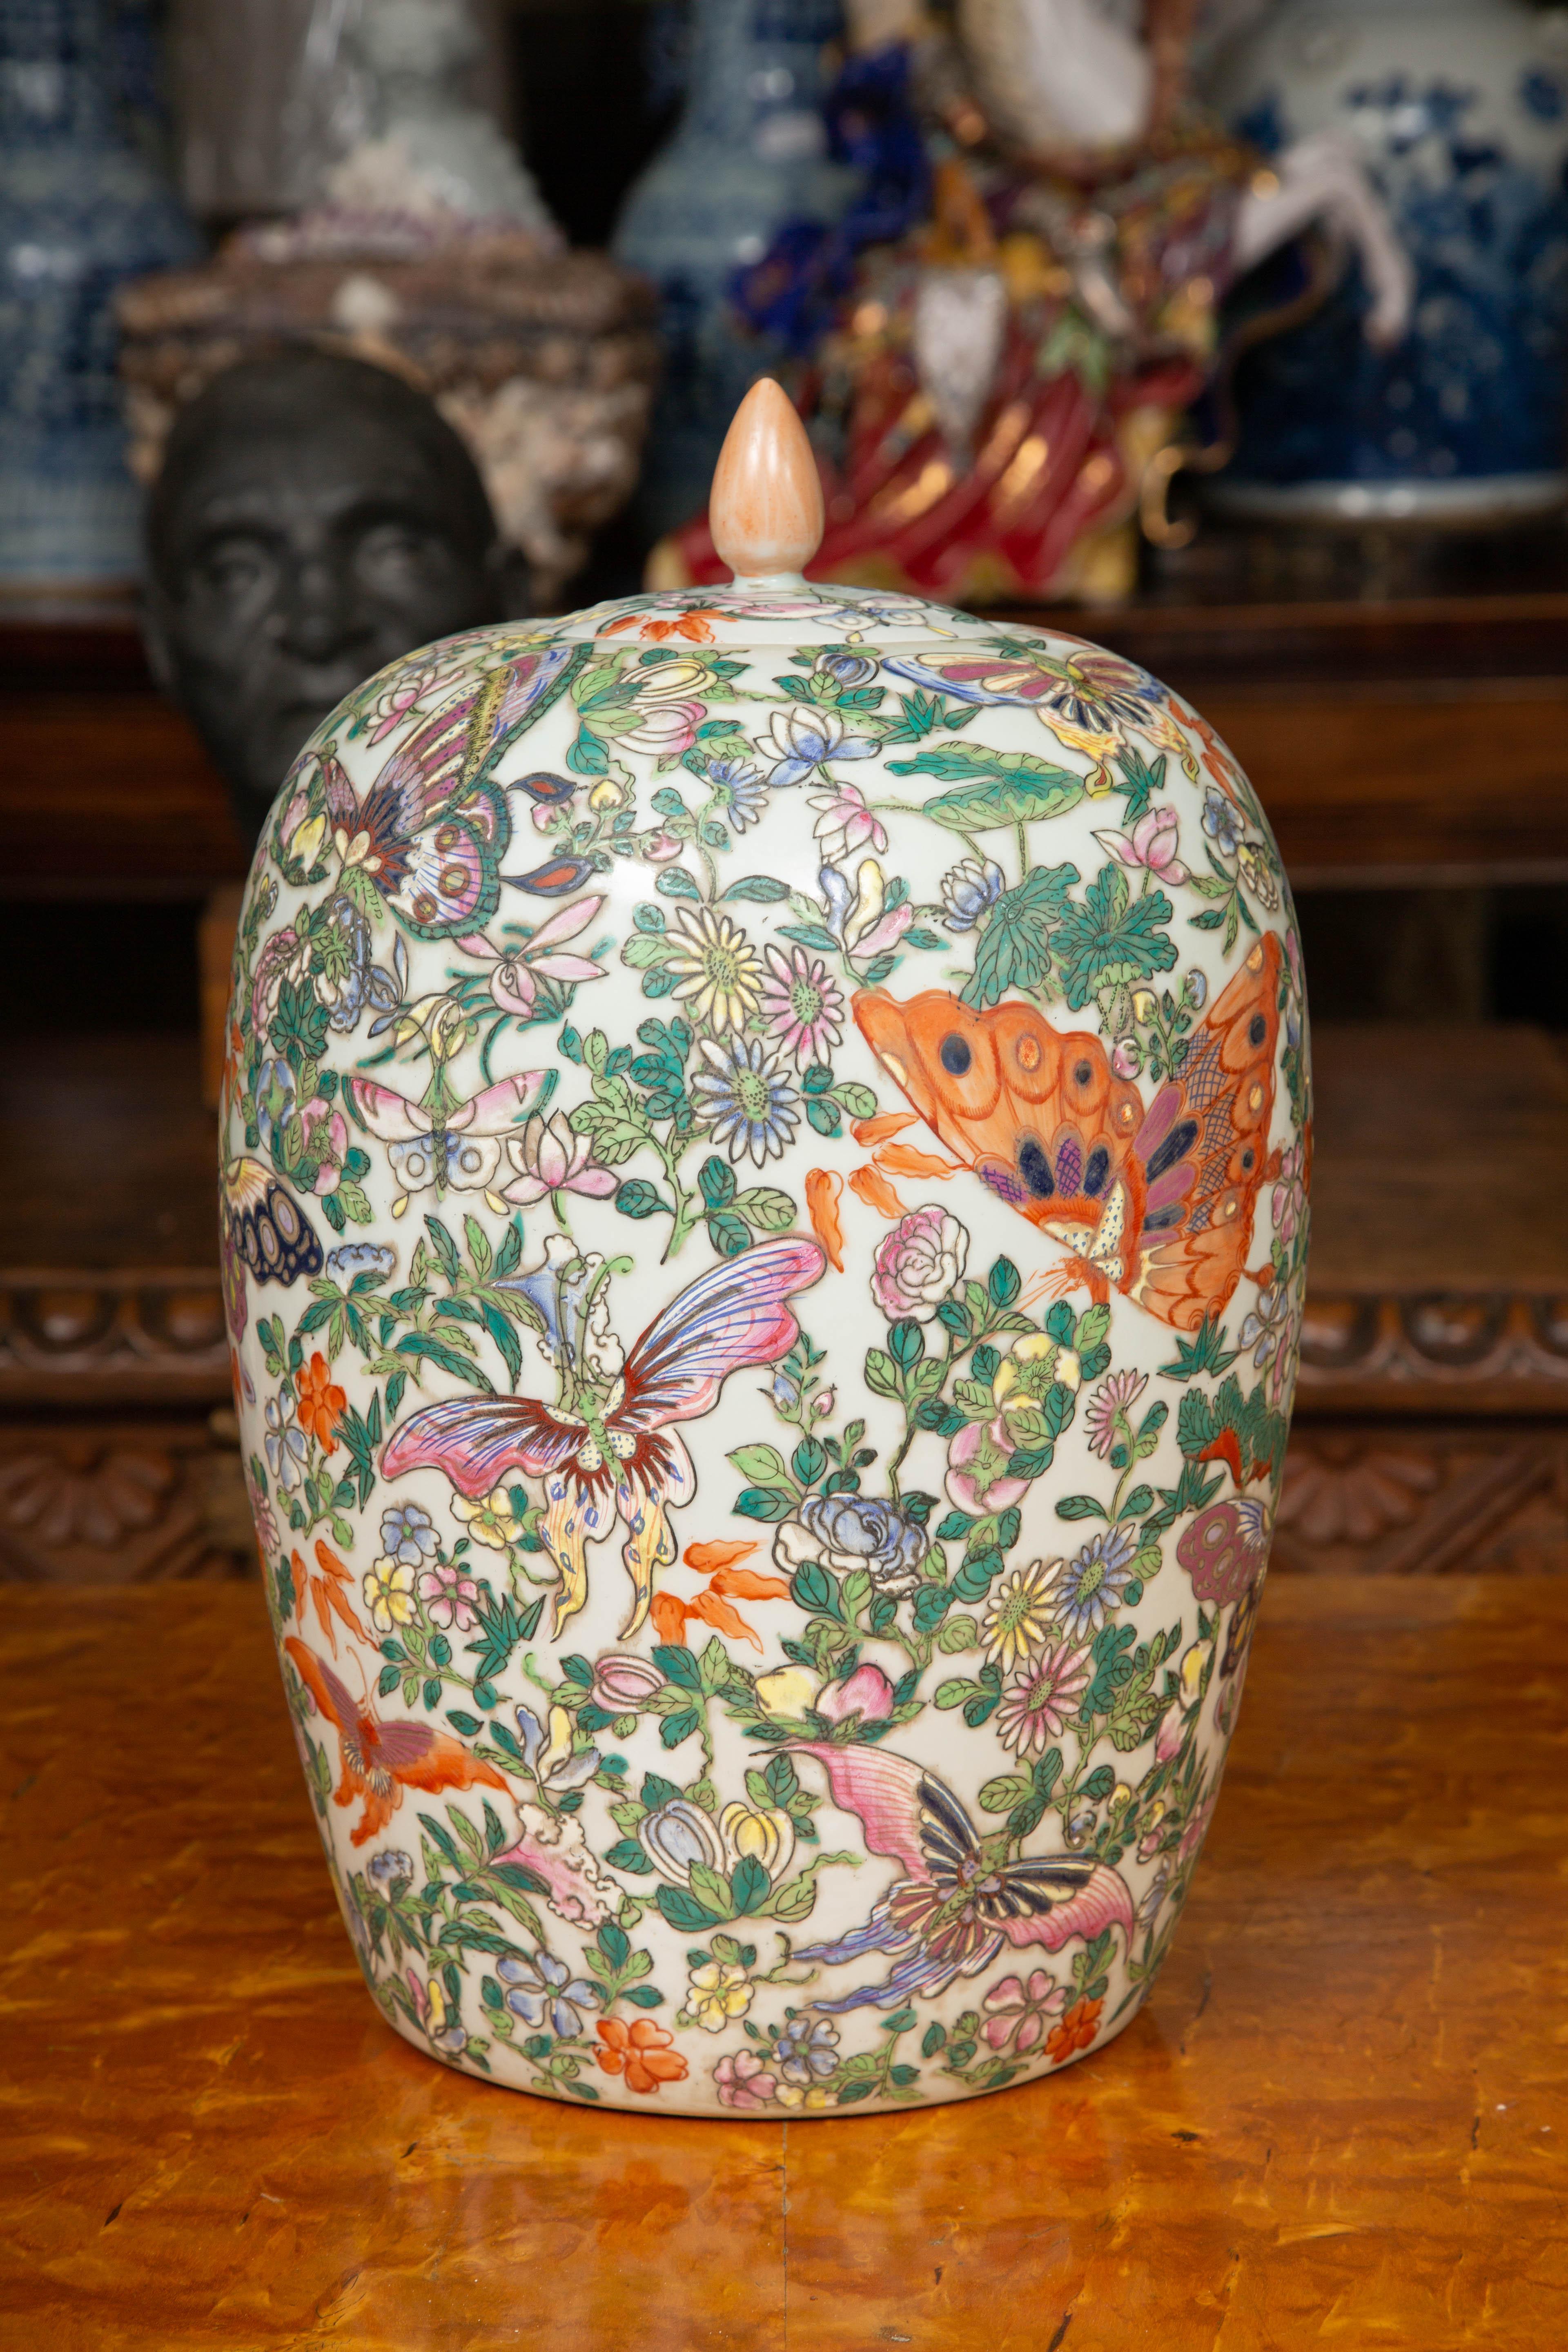 These are a colorful and detailed pair of Chinese Canton export butterfly pattern lidded melon shaped Asian jars. The hand painted jars yield a relief from the exquisitely overglazed enamel design, 20th century.